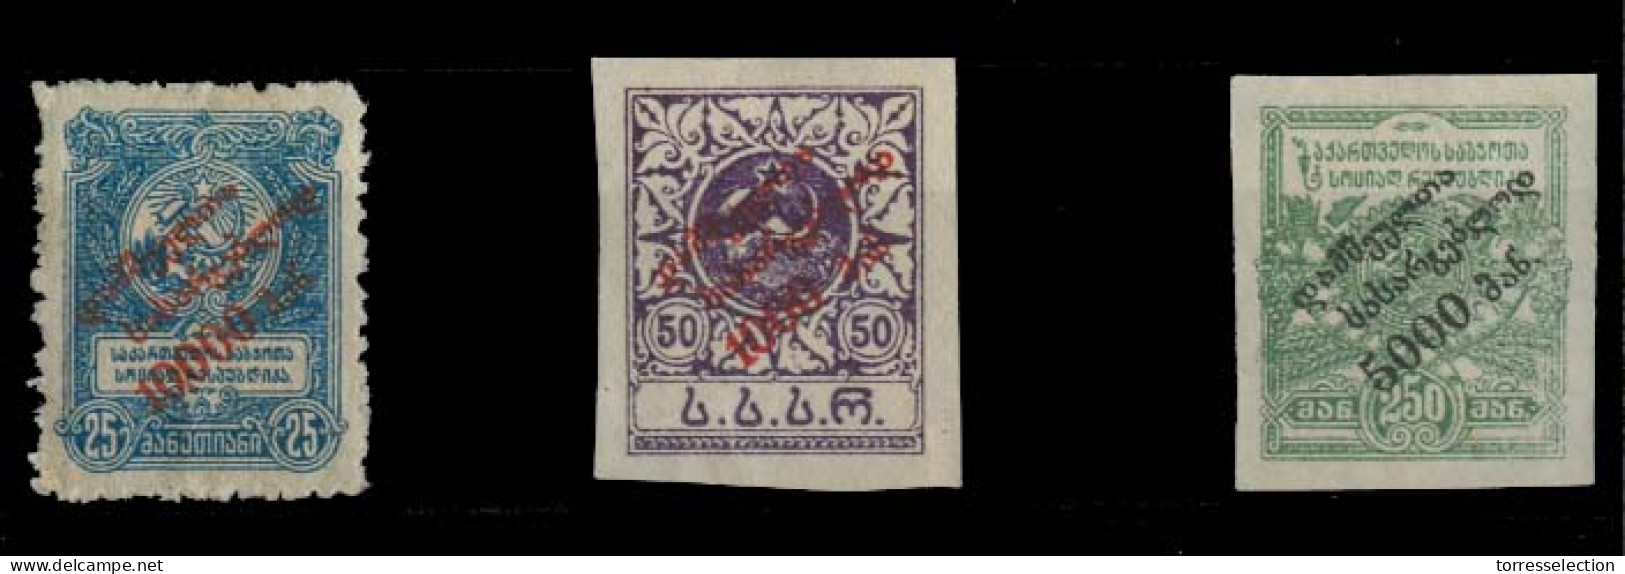 GEORGIA. C.1920. 3 Overprinted Stamps. Sold As Is. Rare In All Forms. - Georgia